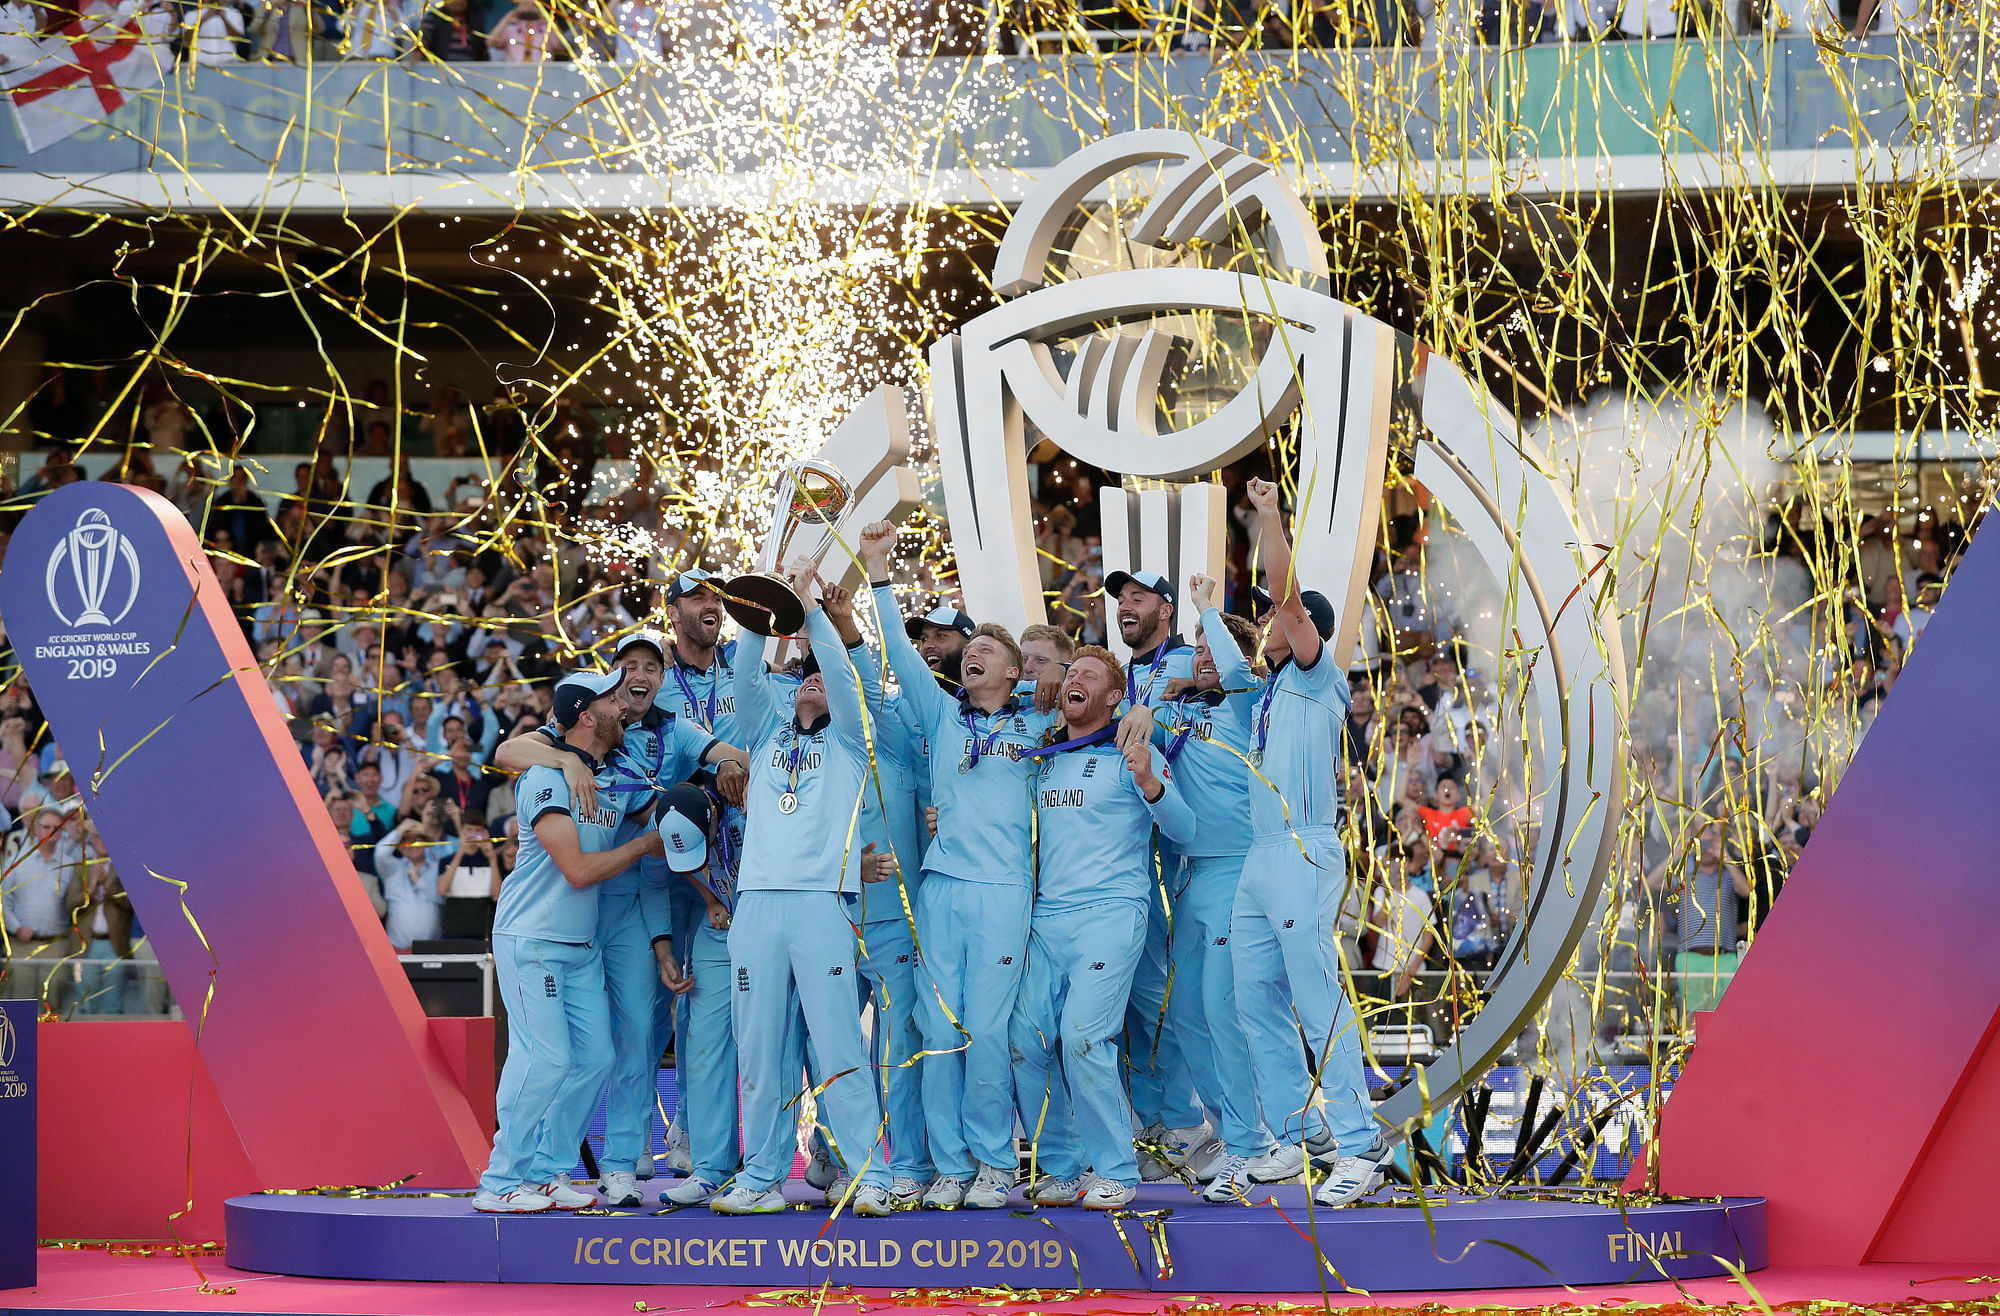 England’s journey to become the 2019 ICC World Cup Champions